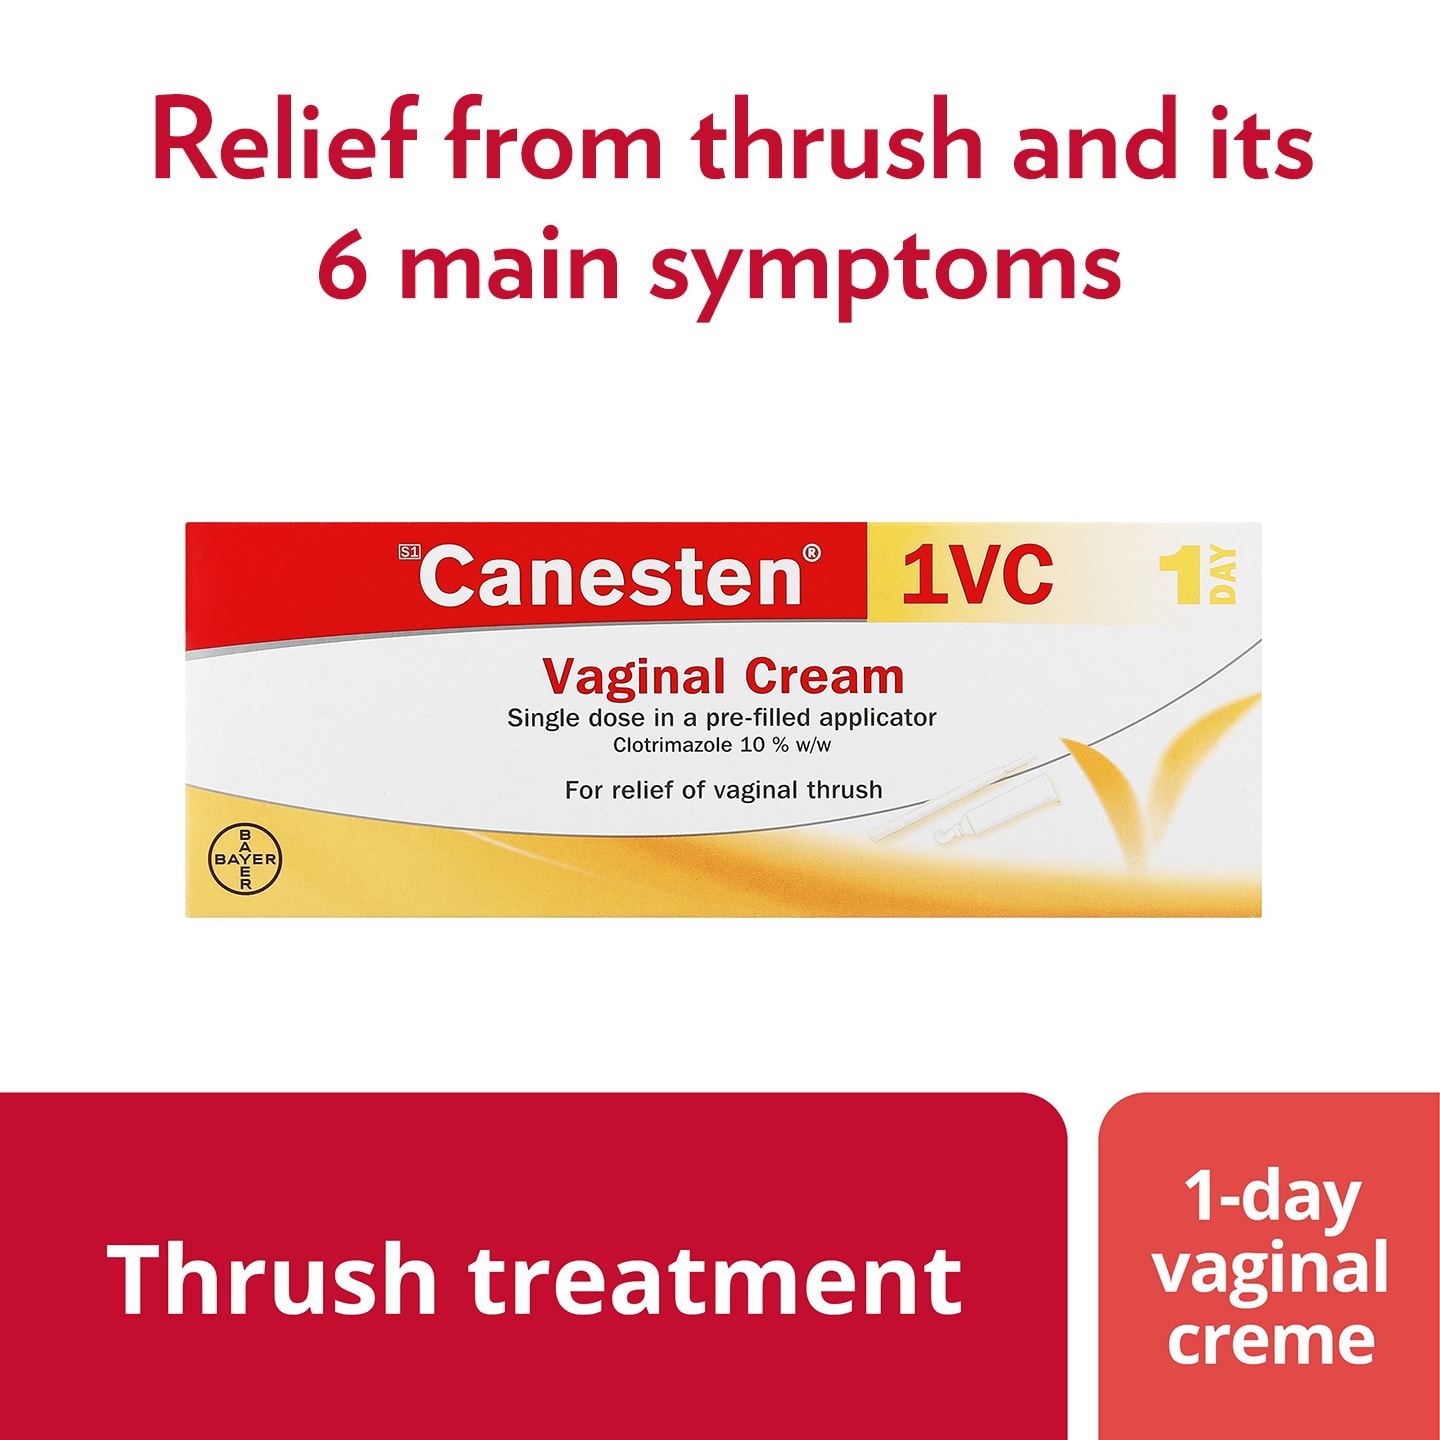 Thrush treatment 1-day vaginal cream: Canesten Thrush Internal Cream, with caption on top: Complete relief from thrush and its 6 main symptoms